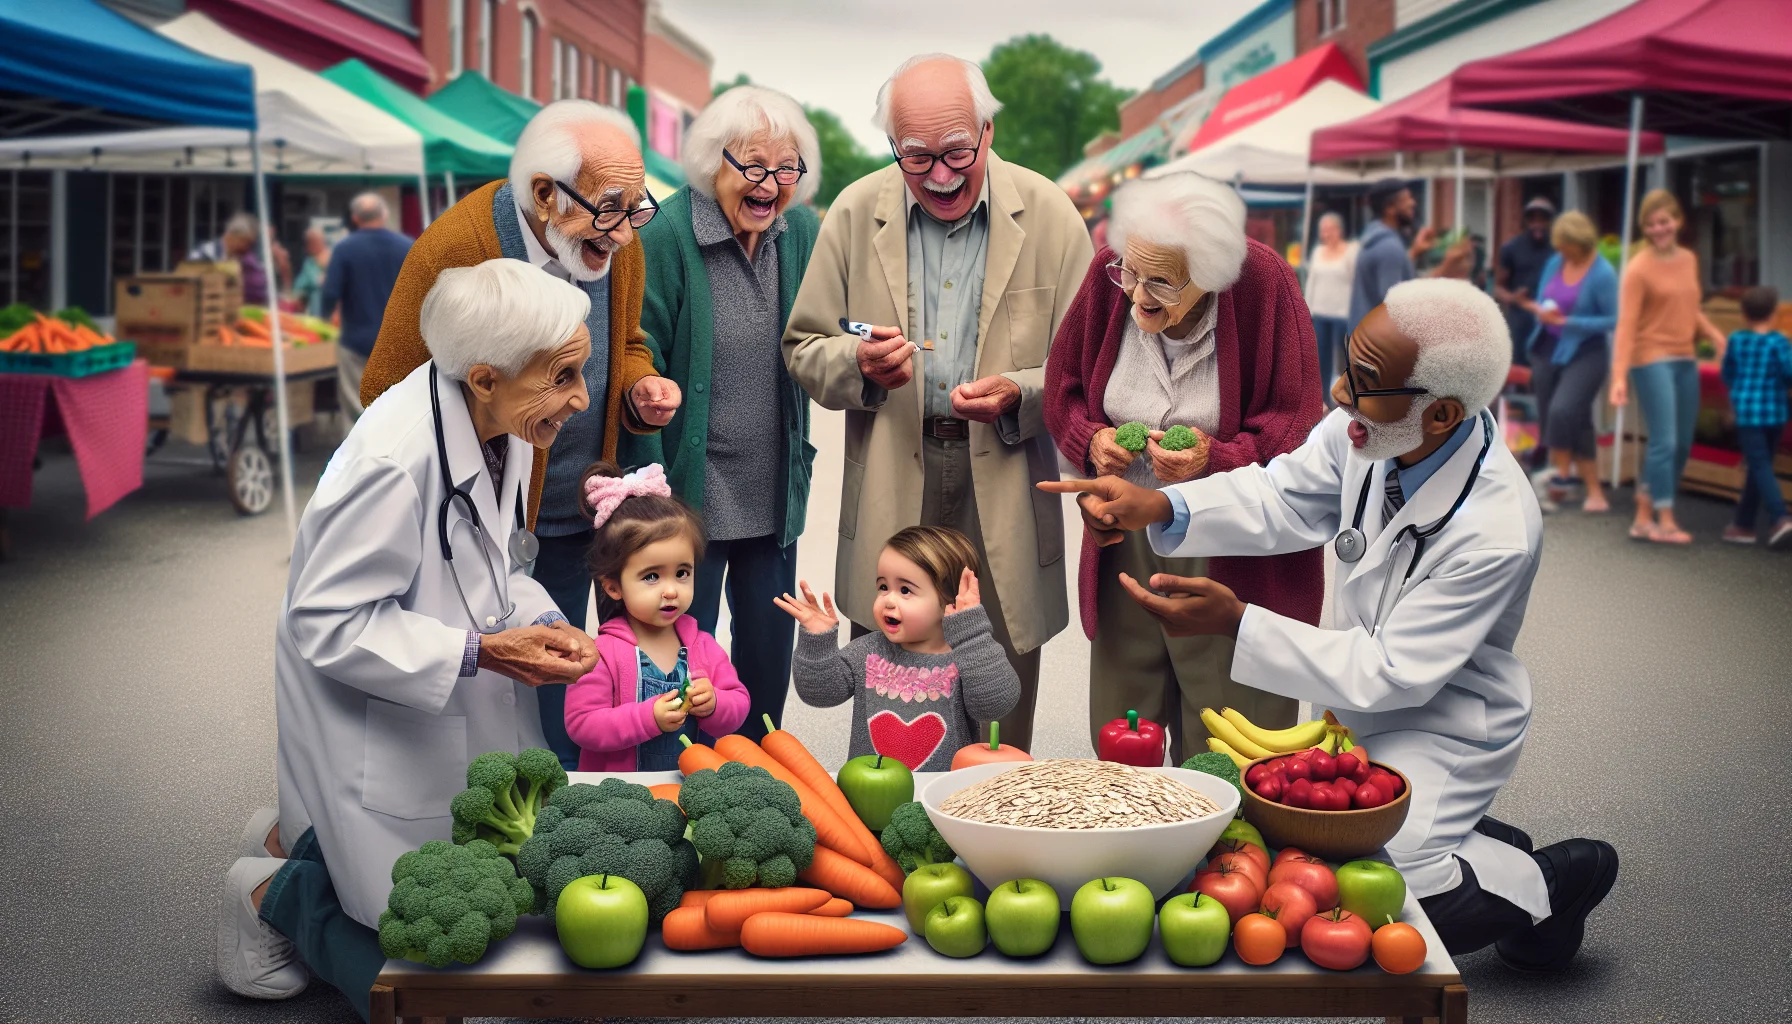 Design a humorous realistic image featuring high fiber foods for young kids. Imagine this scenario playing out at a bustling local farmer's market with colorful food stalls. A group of jovial elderly folks, of diverse descents such as Caucasian, Asian, and African, are engaging with the toddlers playfully. They are involved in a light-hearted scene of 'pretend' diet consultation, with the little ones earnestly giving advice about healthy eating. Toddlers of various descents - including Hispanic, Middle-Eastern, and White - armed with vegetables and fruits like broccoli, apples, and oats, are acting as dietitians, complete with miniature white coats and wellness charts.